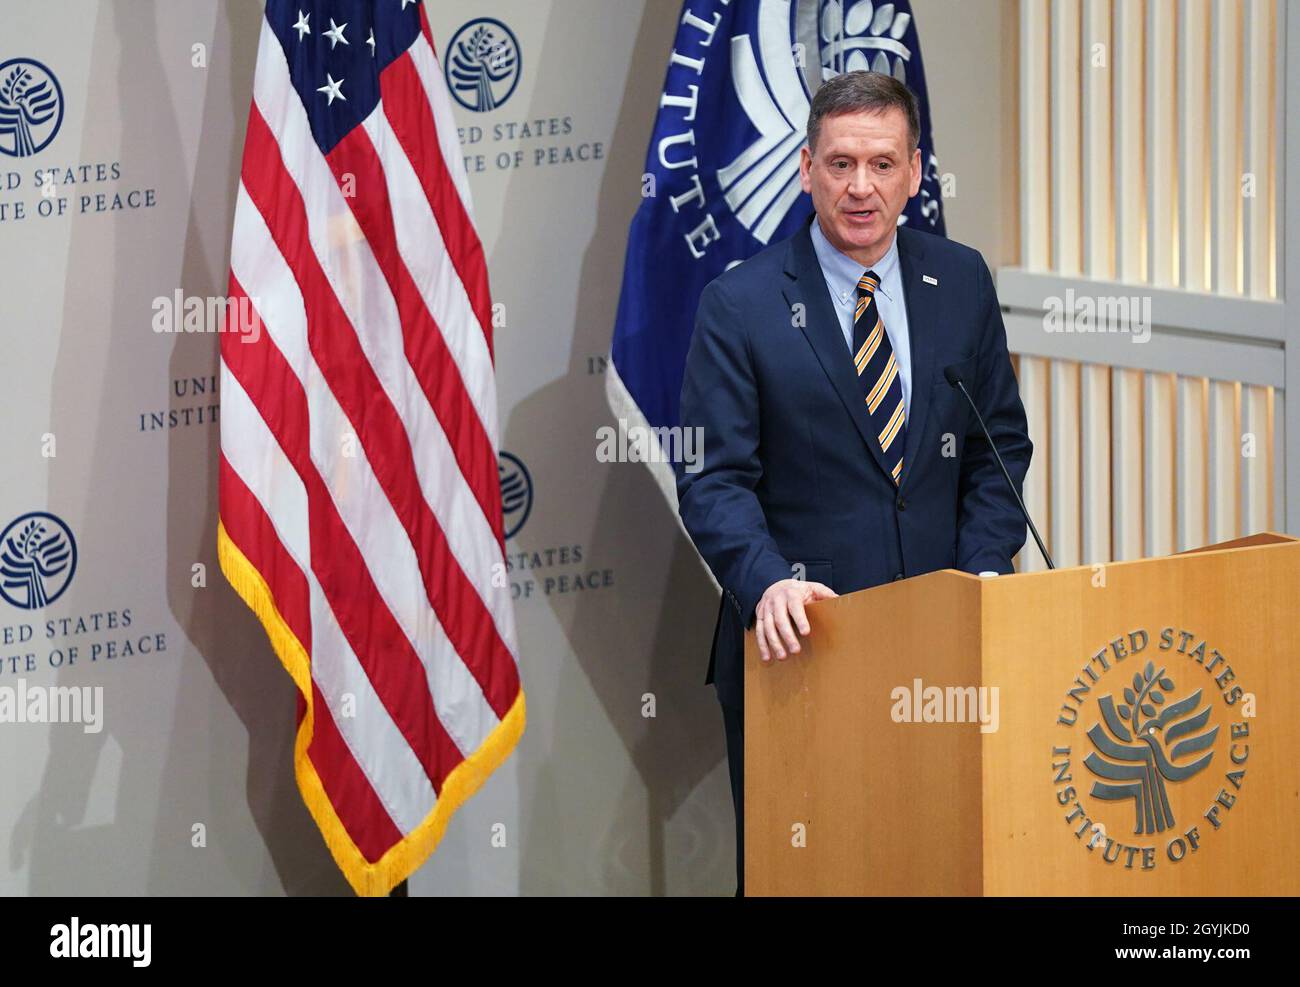 United States Agency for International Development Administrator Mark Green speaks about democracy and citizen responsive governance at the 'A Governance Agenda for Preventing Violence in a Fractured World” conference at the United States Institute of Peace. Stock Photo